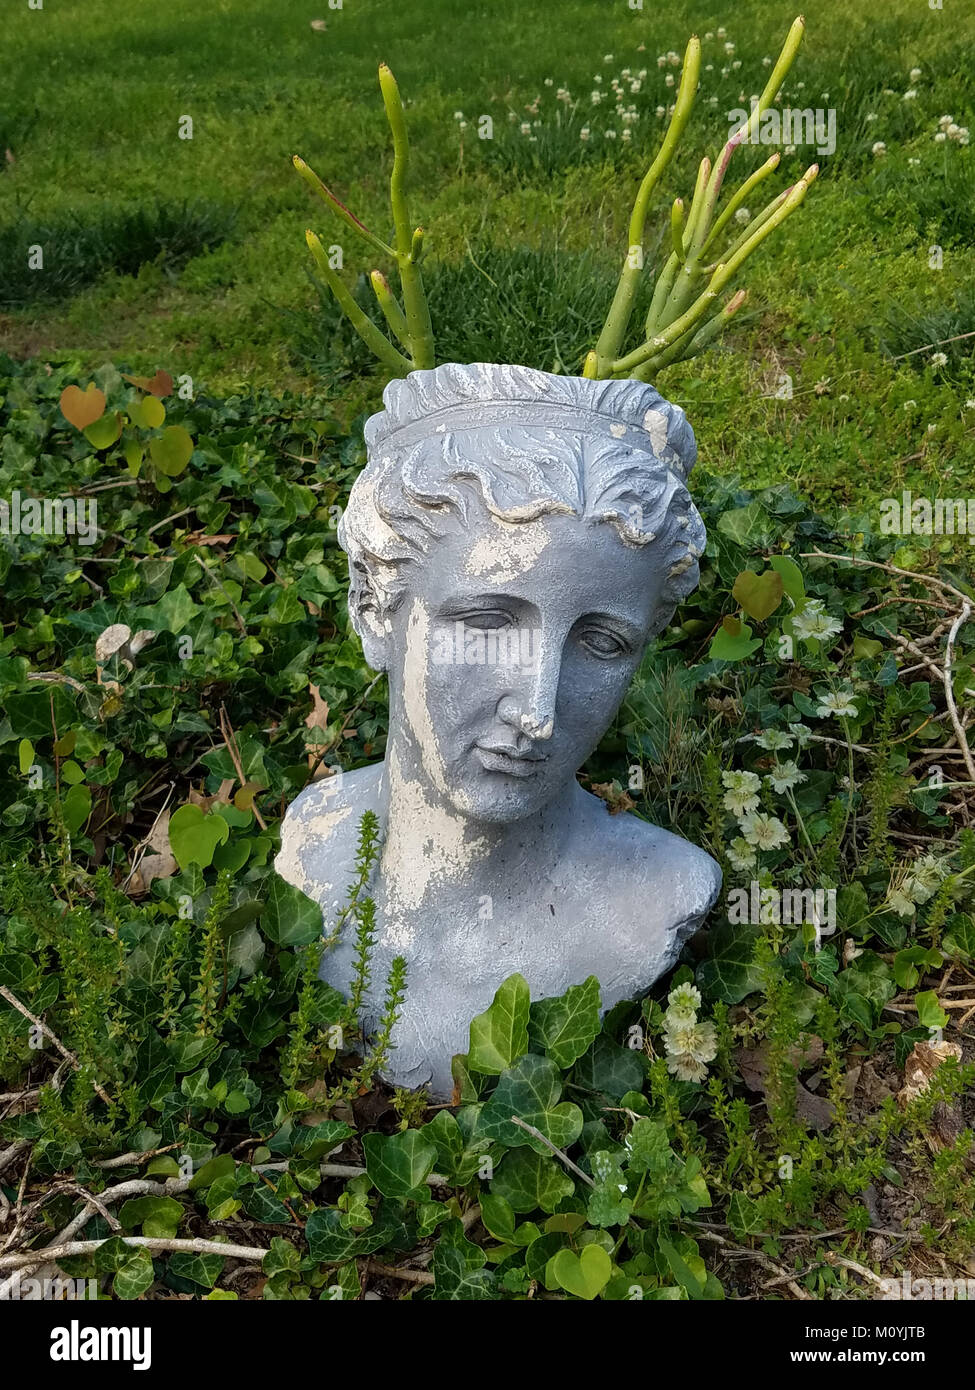 Roman head planter with cacti growning out of its head in a bed of ivy and grasses in the Stock Photo